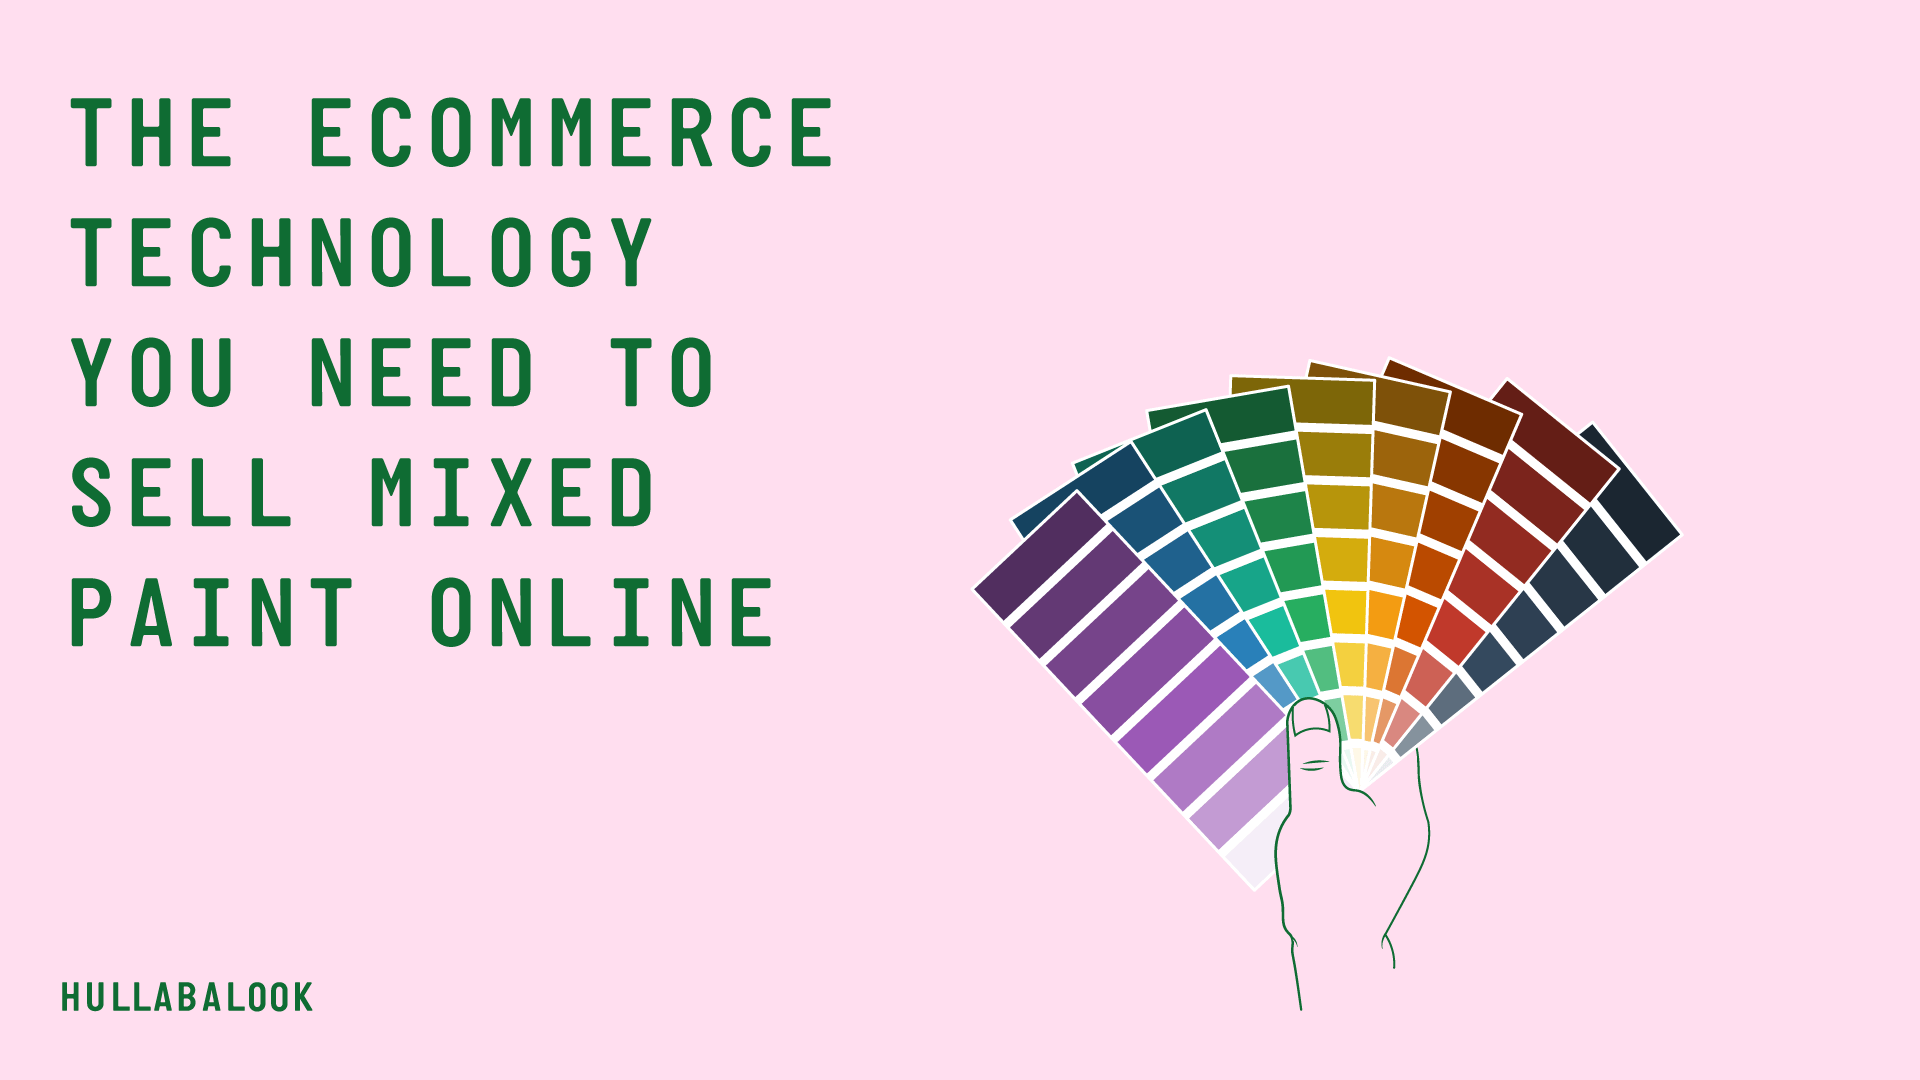 The Ecommerce Technology You Need To Sell Mixed Paint Online